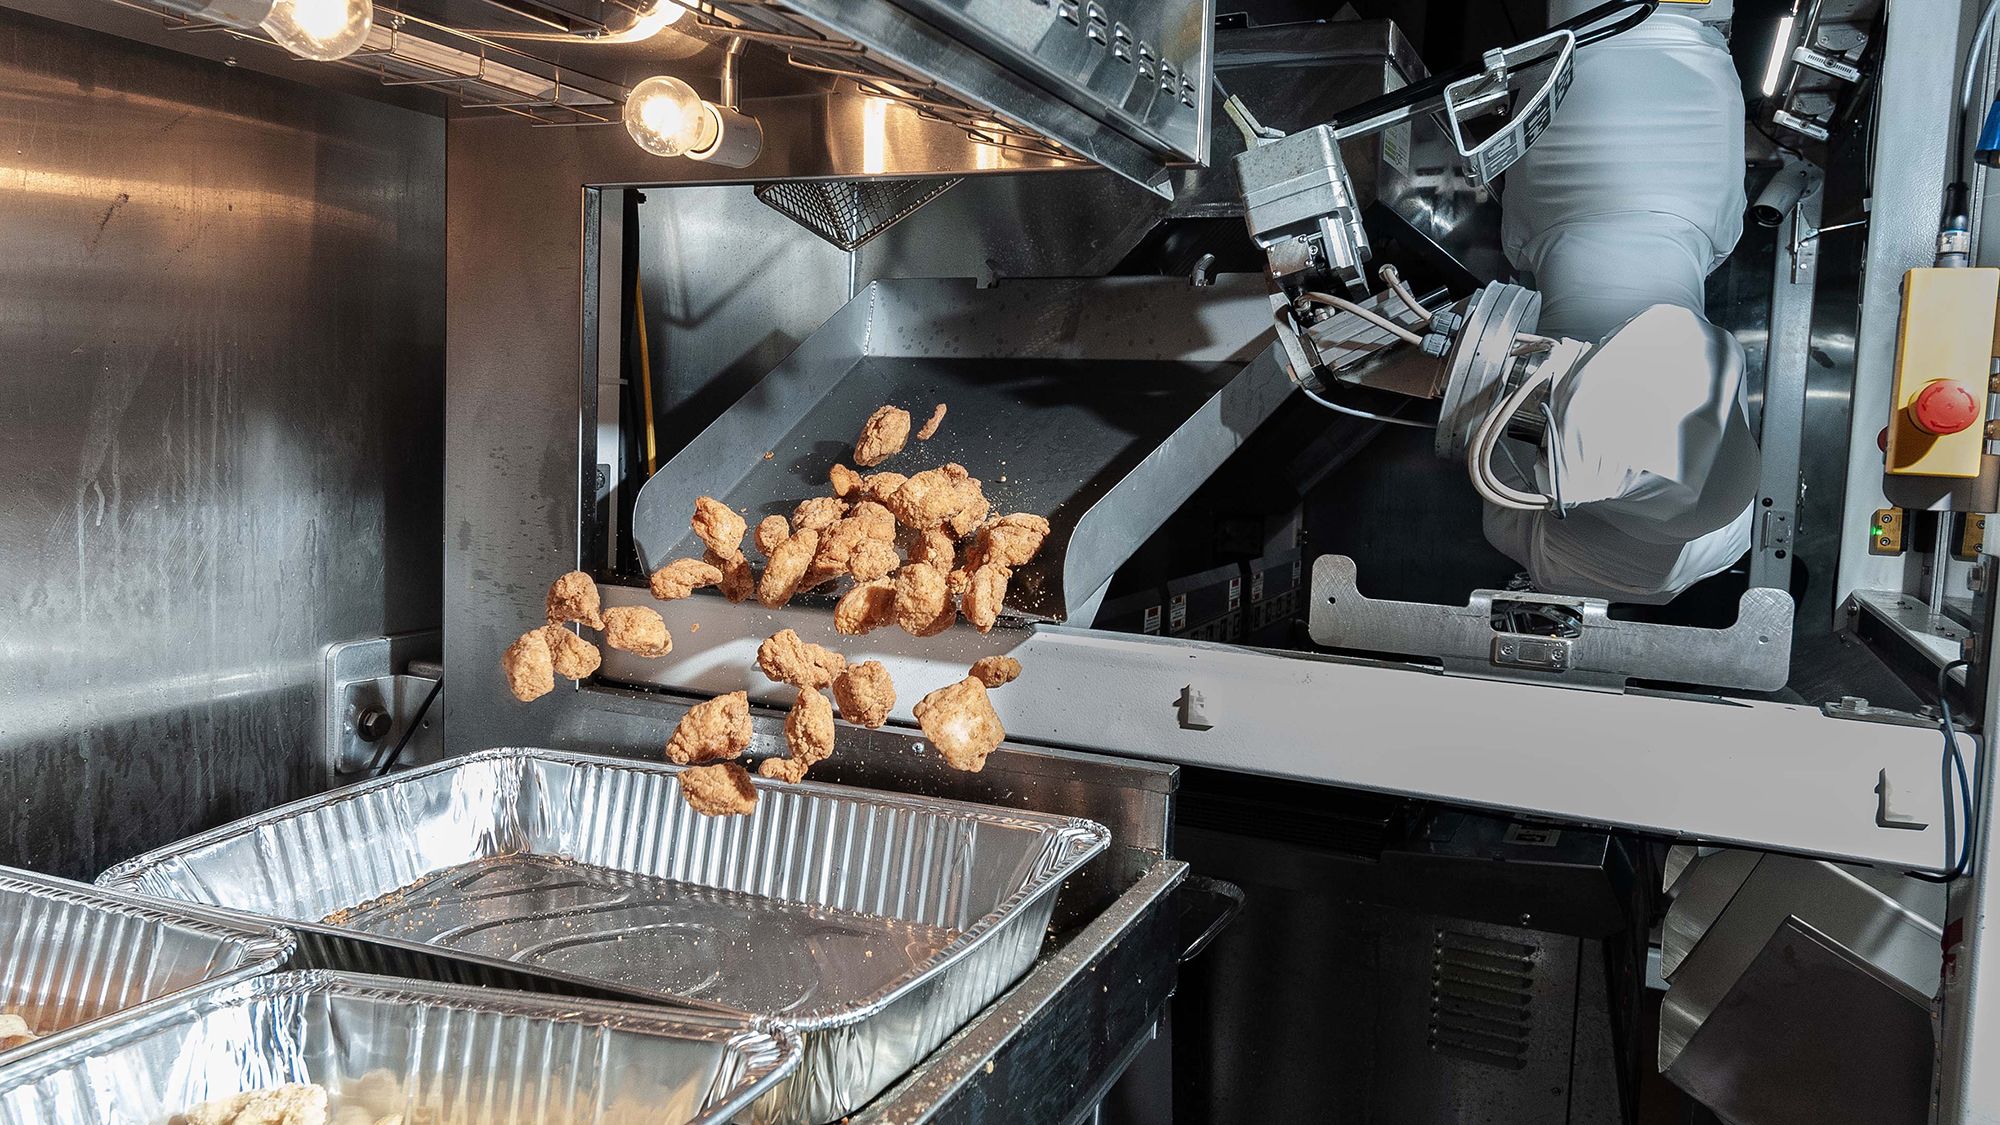 Northern temperament Bil White Castle thinks a robot can make better french fries | CNN Business